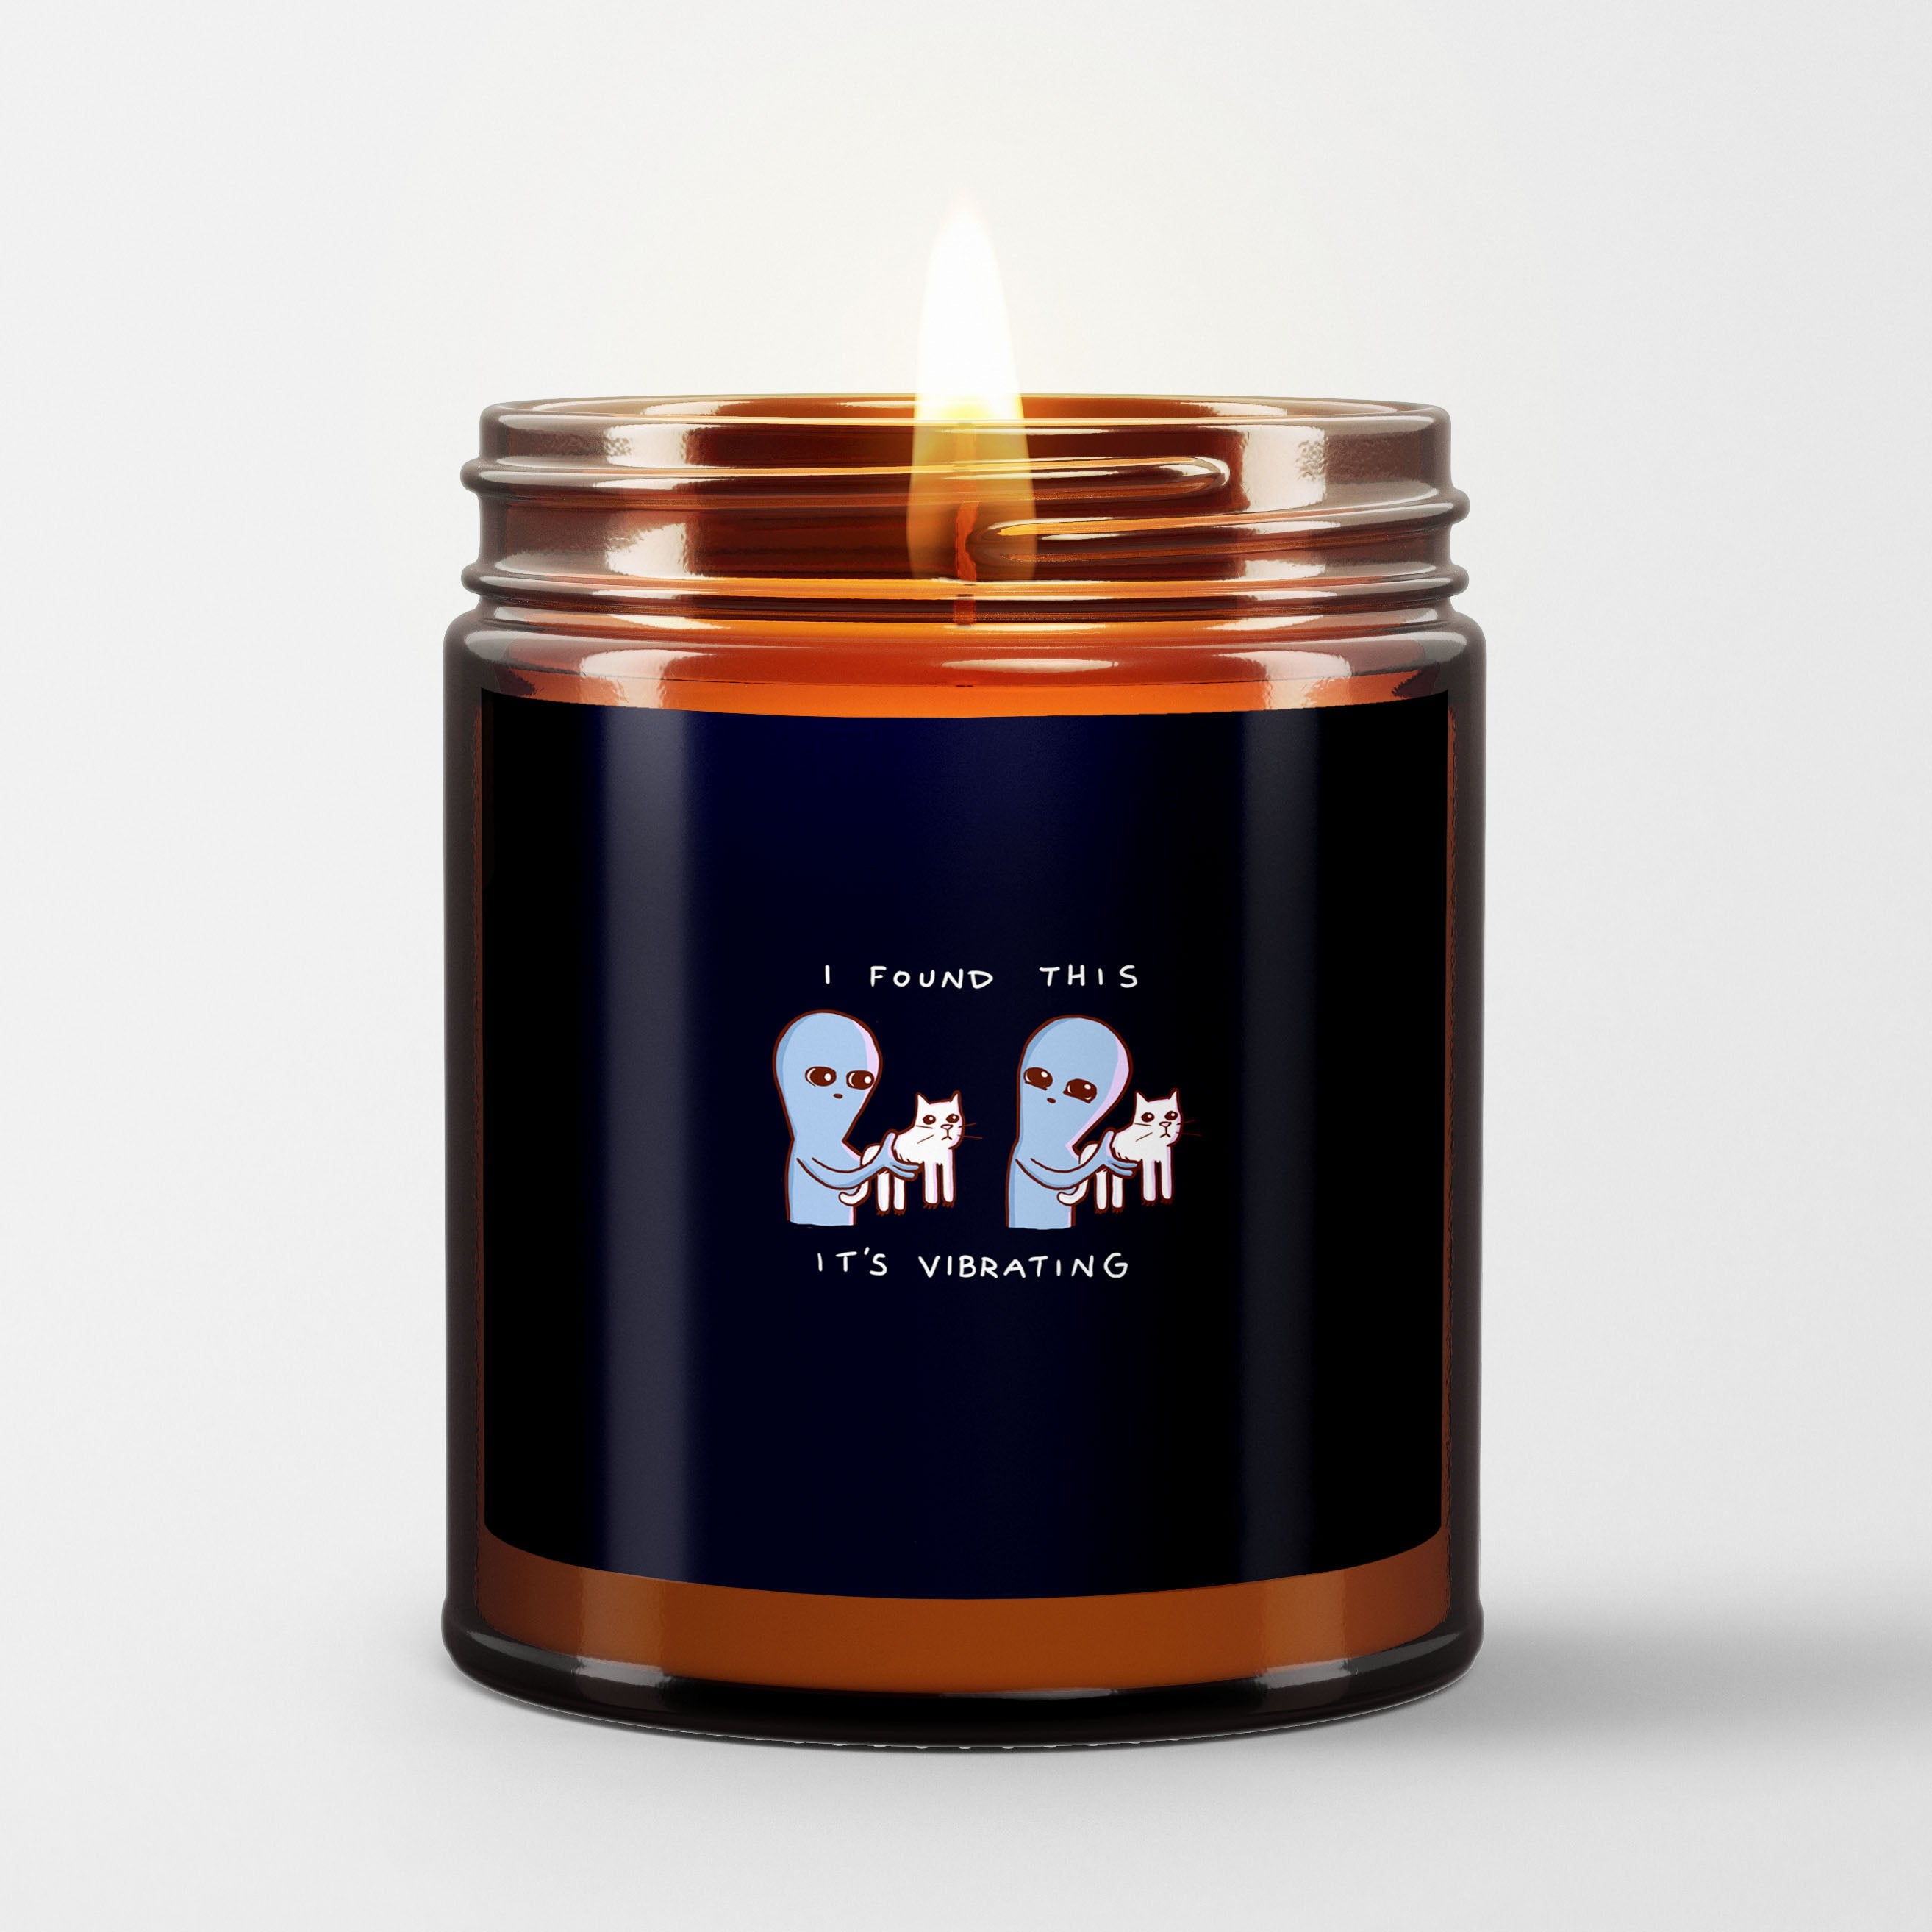 Strange Planet Scented Candle I It's Vibrating | Nathan W Pyle